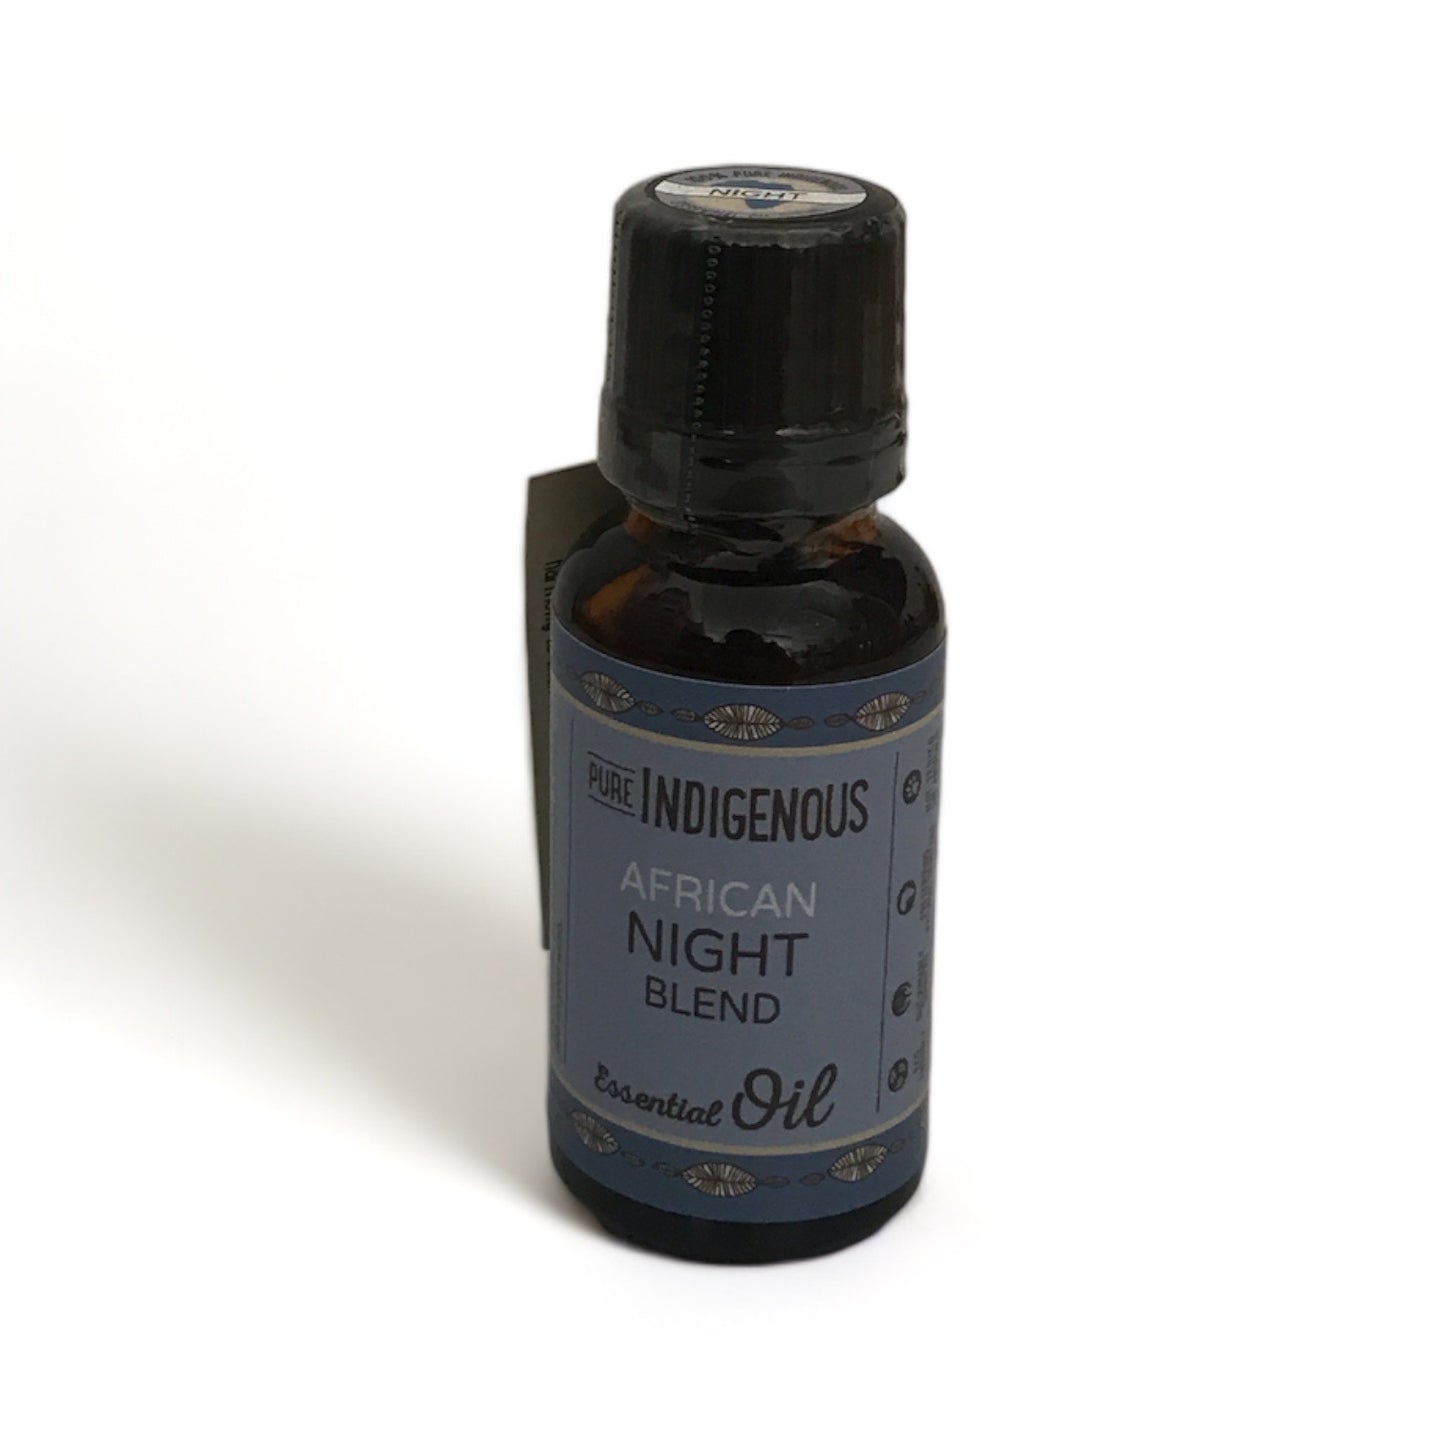 African Night Blend Essential Oil- Pure Indigenous